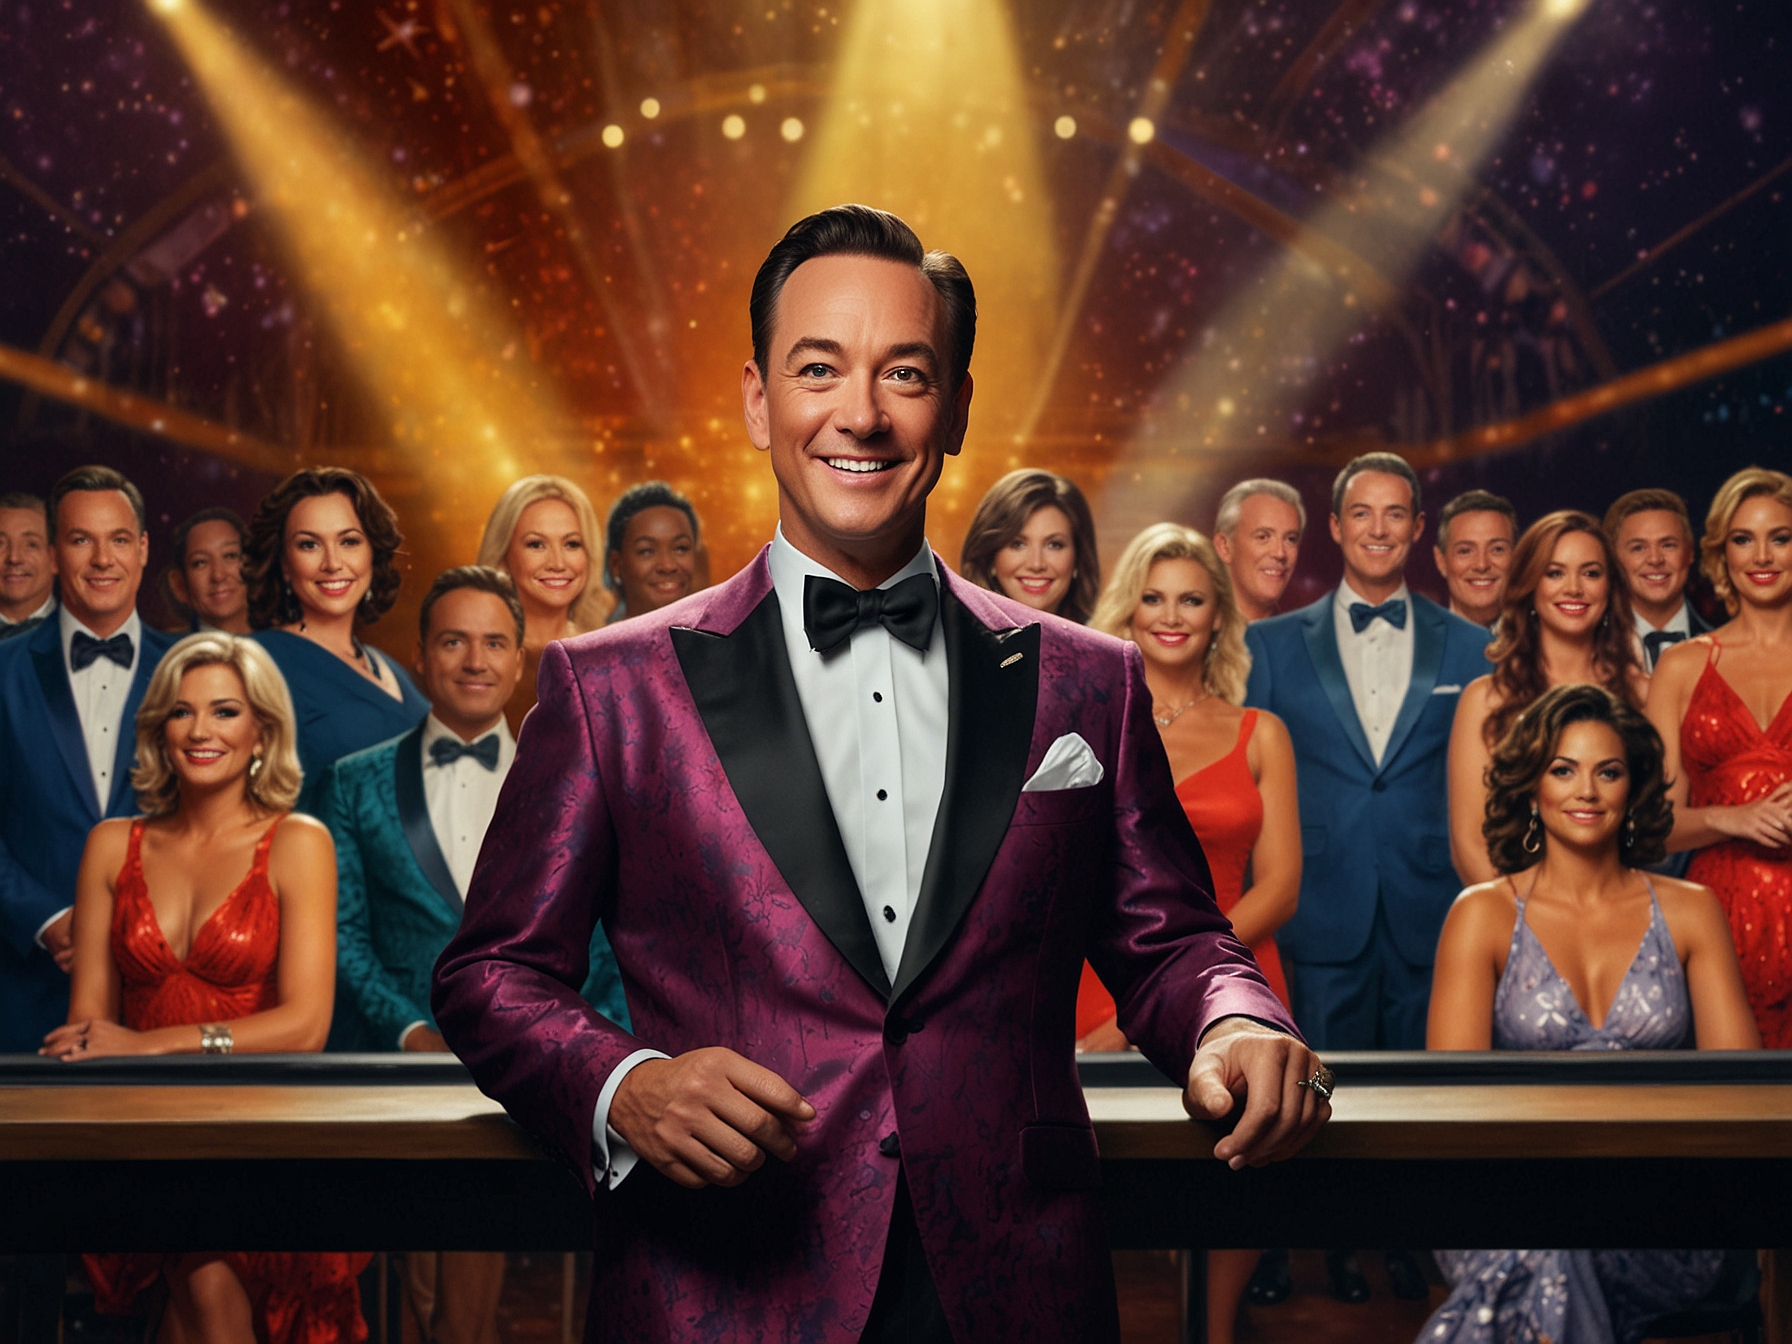 A vibrant collage featuring Craig Revel Horwood judging on Strictly Come Dancing and performing on stage, illustrating his versatile talents and career evolution.